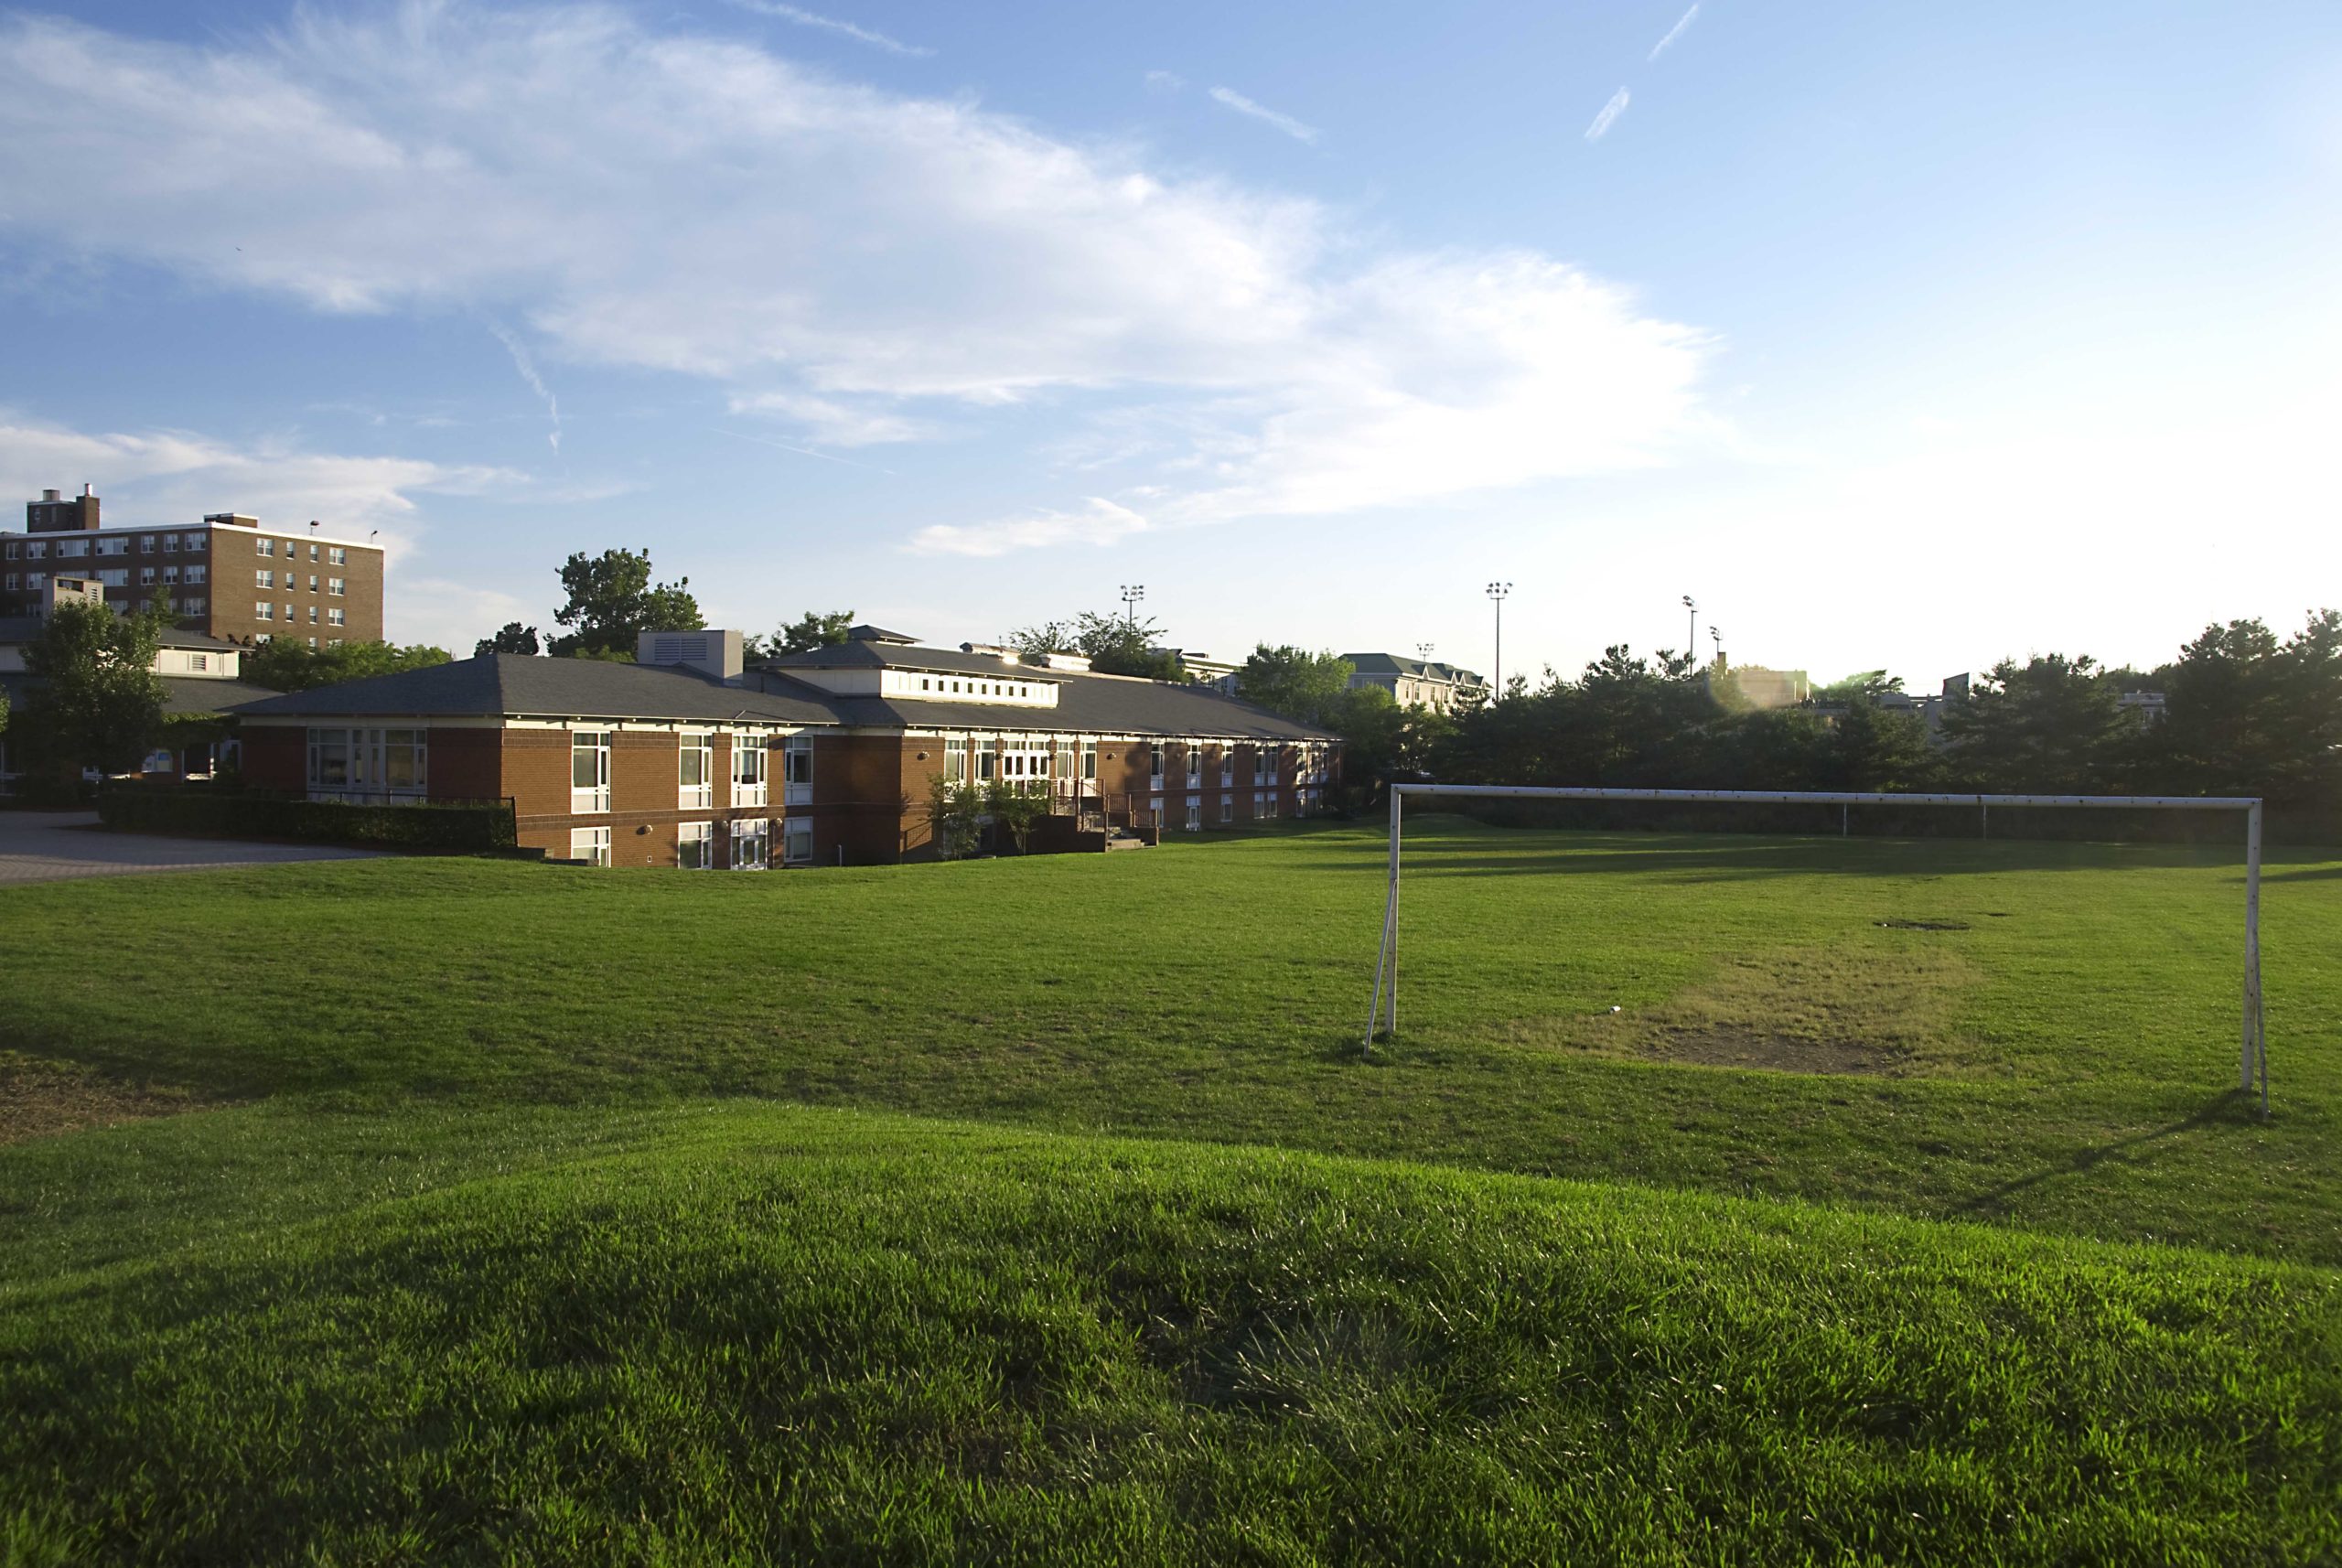 Cambridge Friends School sits on four acres, with a regulation-size soccer field for sports, two play structures, and space to run